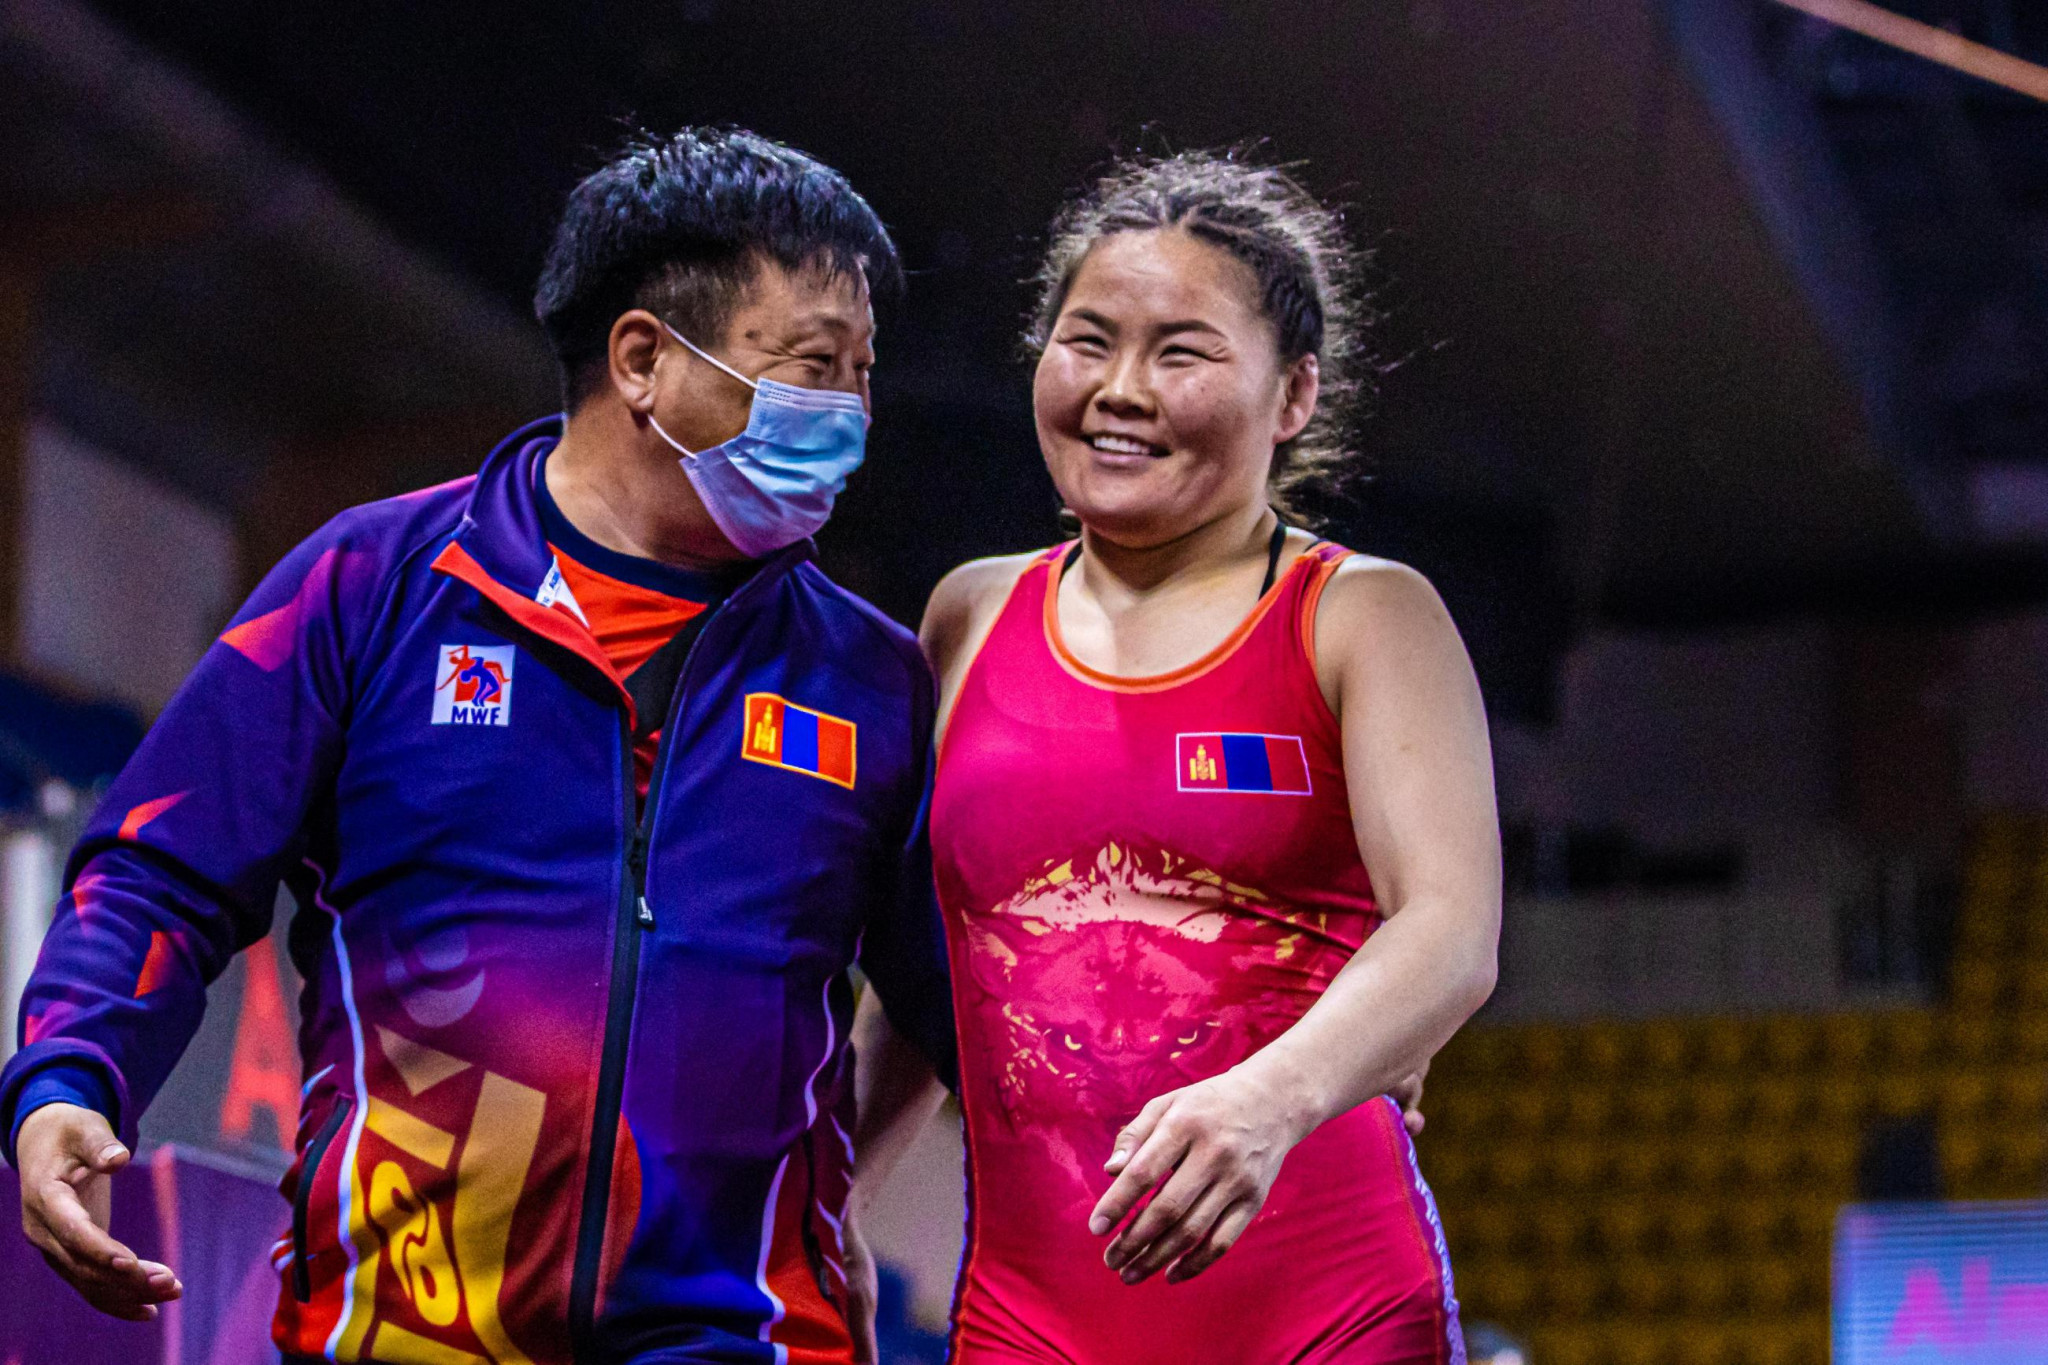 Mongolia’s Bolortungalag Zorigt won her first UWW Asian title by defeating India's Rio 2016 bronze medallist in Almaty today ©UWW